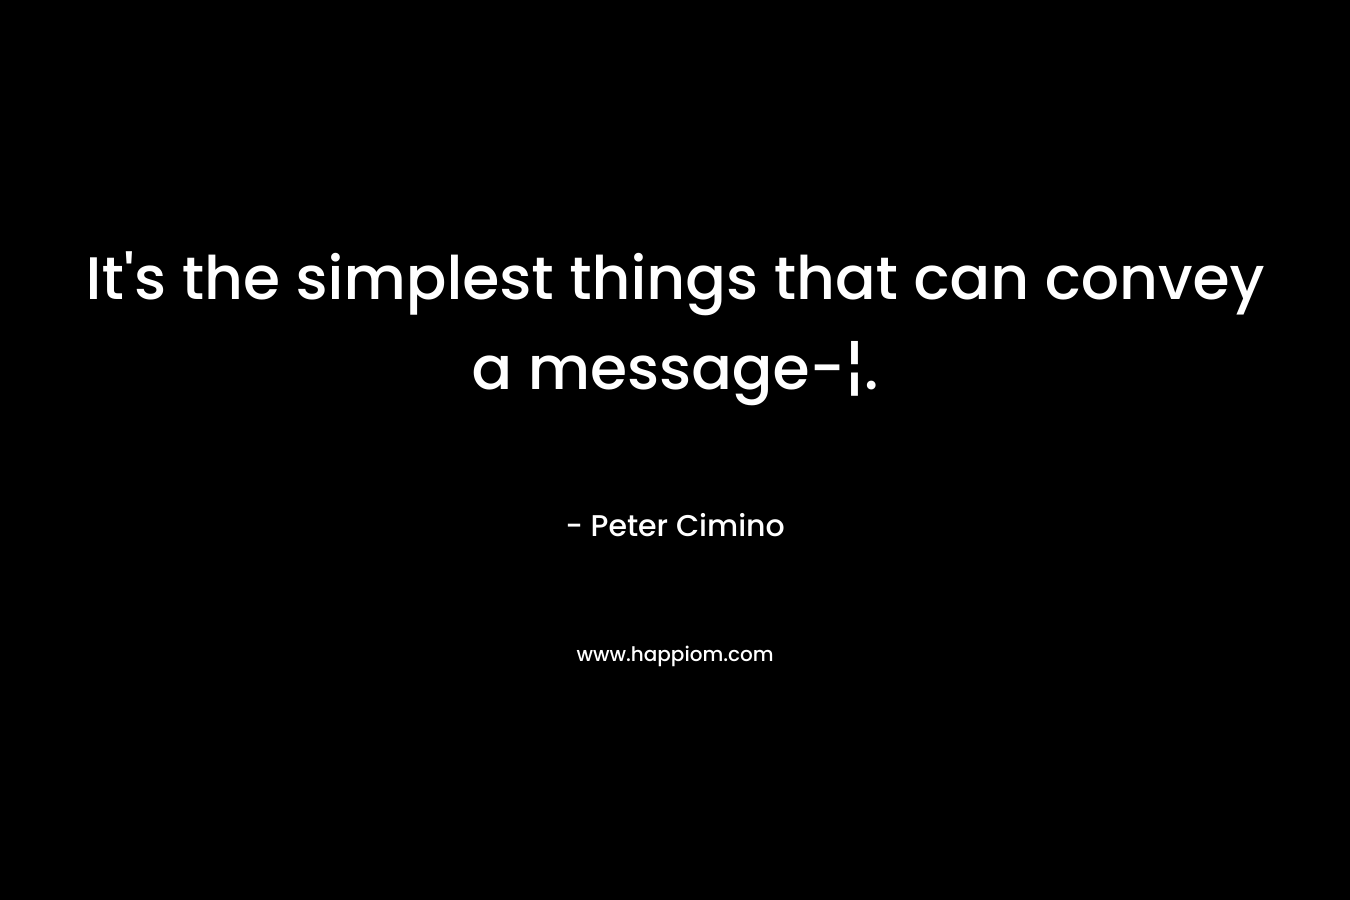 It’s the simplest things that can convey a message-¦. – Peter Cimino